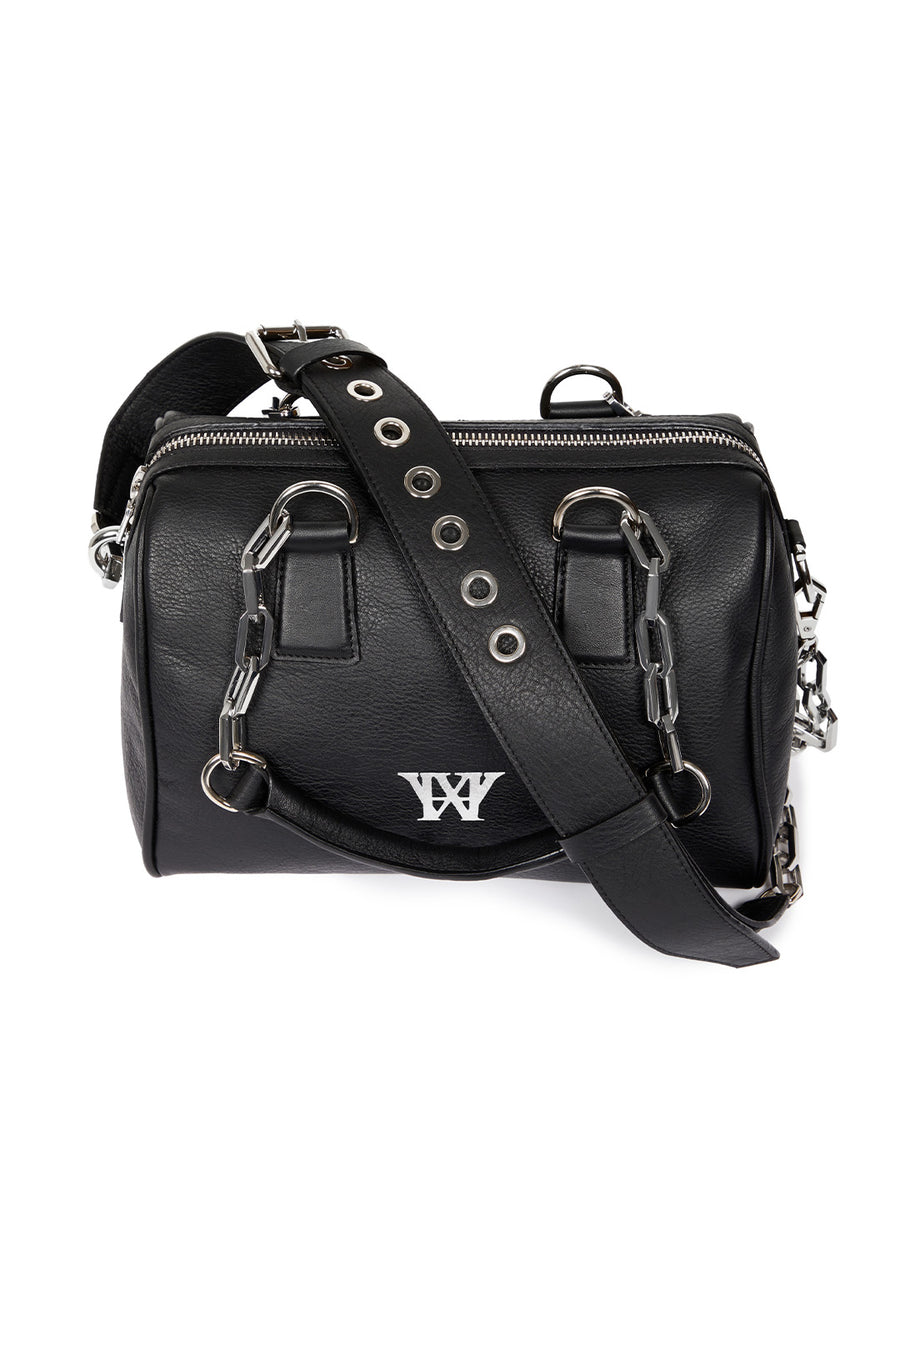 Hardware London Bowling Inspired Leather Bag 